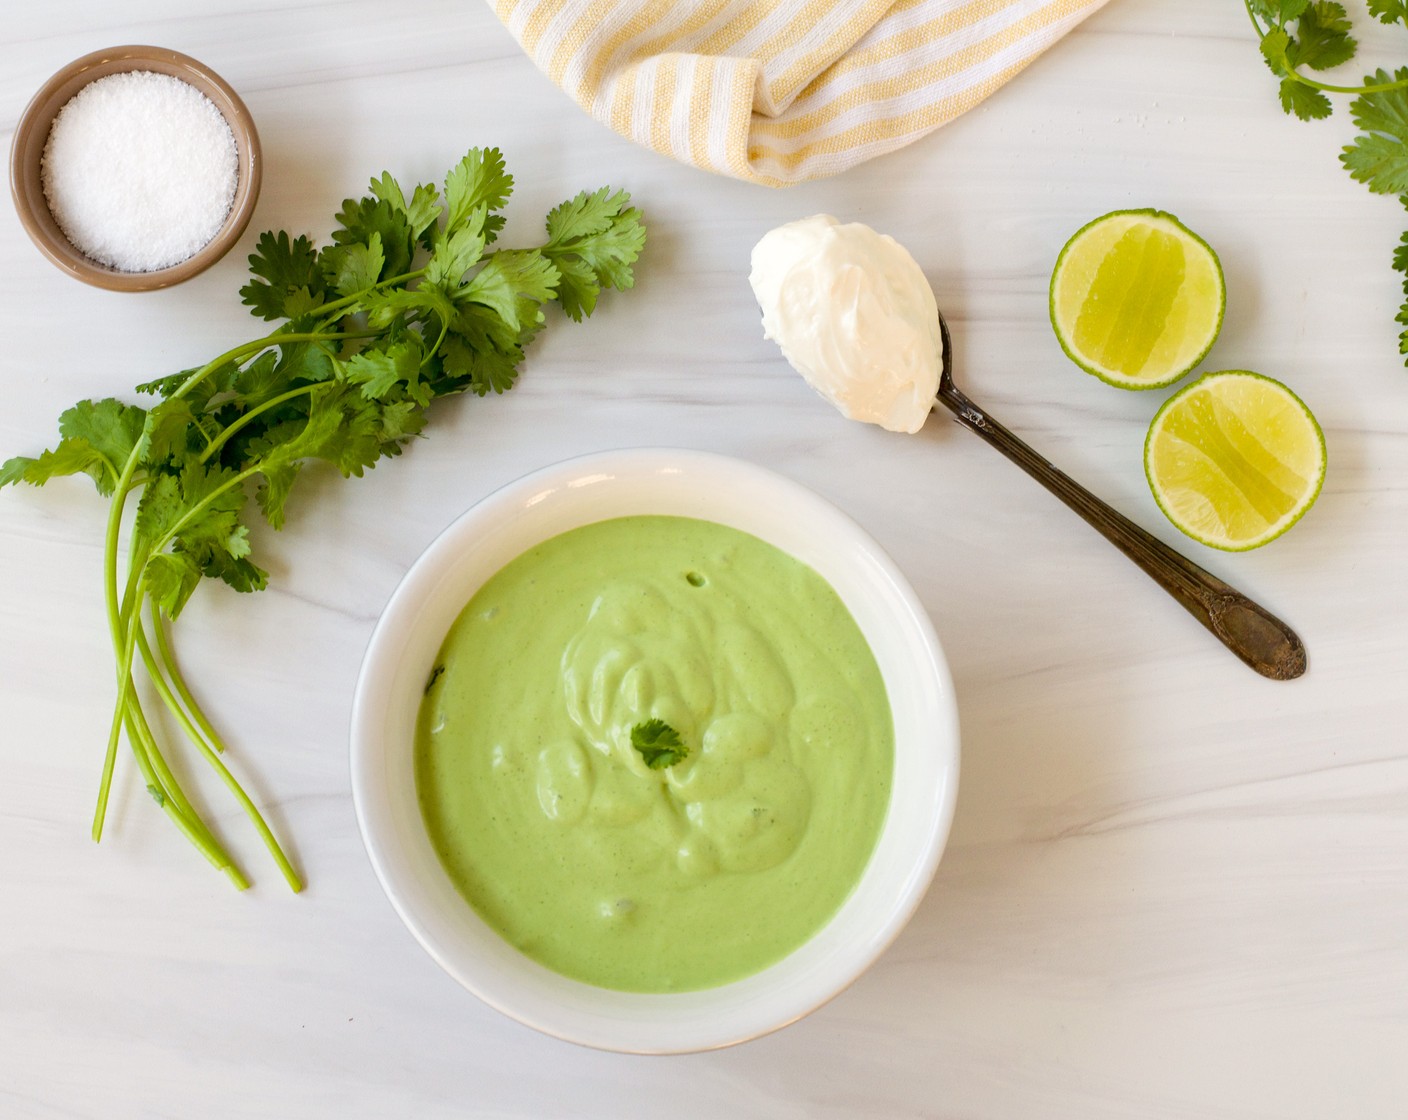 step 5 While the chicken is cooking, prepare the cilantro yogurt sauce: combine the Plain Greek Yogurt (1 cup), Fresh Cilantro (1 bunch), Limes (2) juice, Extra-Virgin Olive Oil (2 Tbsp), Honey (1 Tbsp), and Kosher Salt (1/2 tsp) in a blender and puree until smooth.